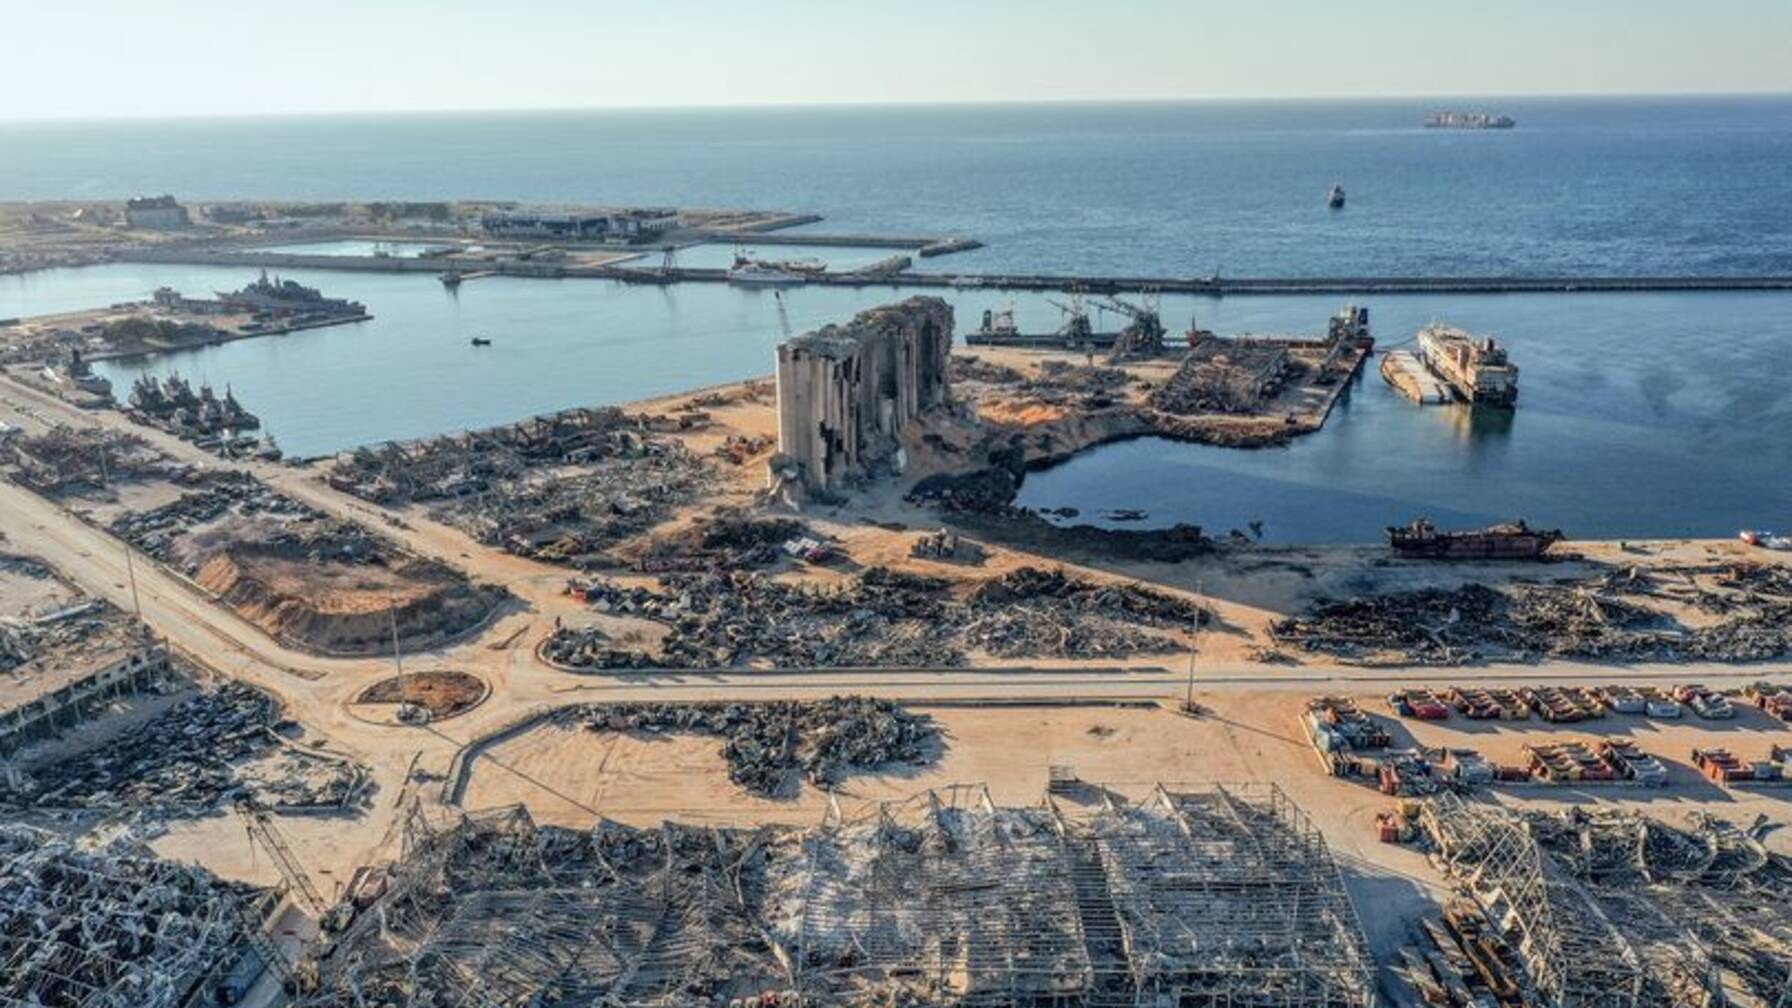 The port of Beirut about a month after the explosion. To this day, the remains of the grain silos stand like memorials.